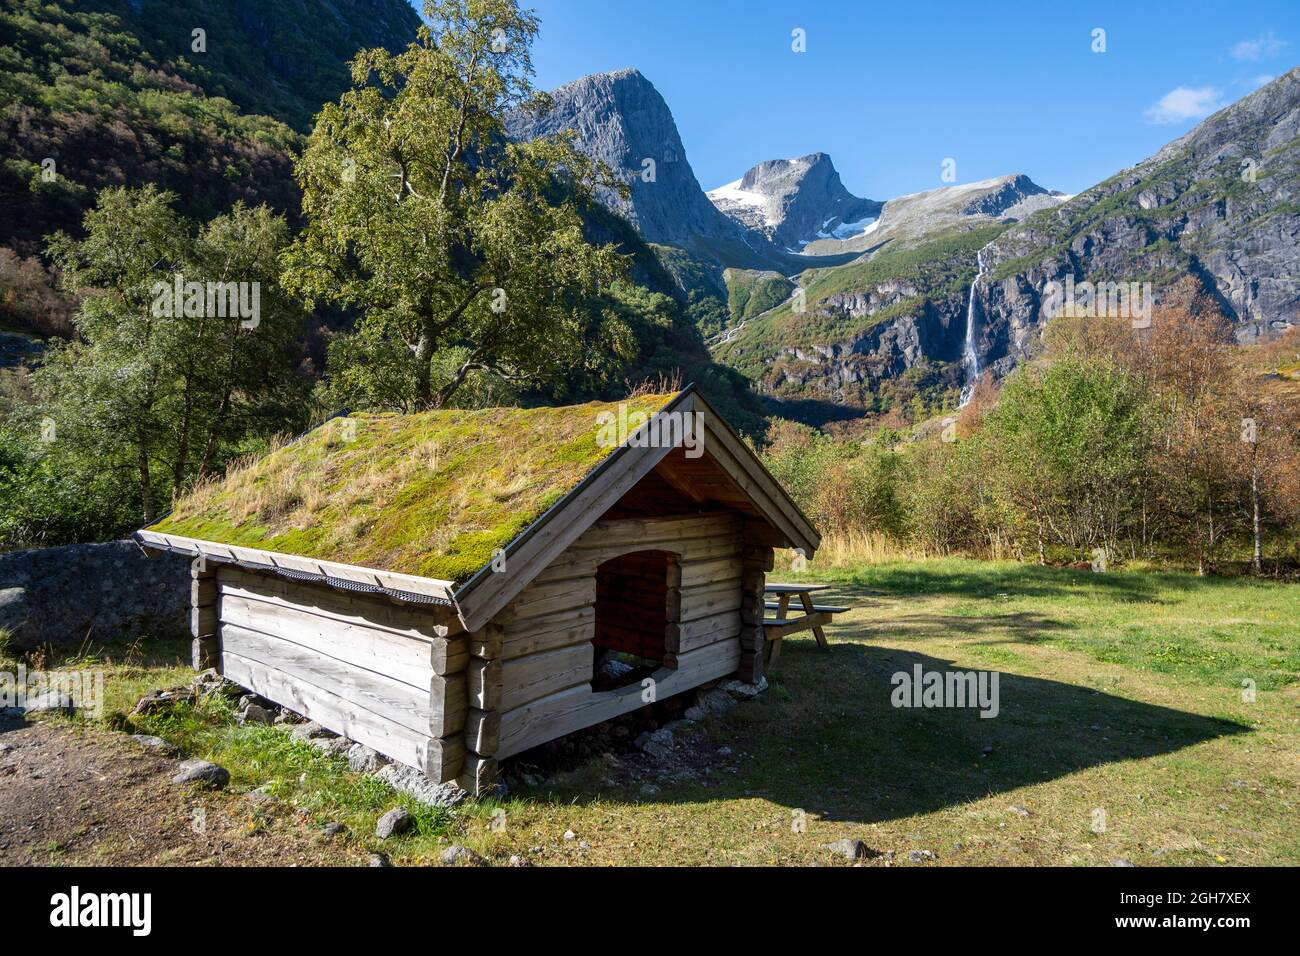 Small wooden cabin with turf grass roof near the Briskdal glacier at Jostedal glacier national park, Norway, Europe Stock Photo